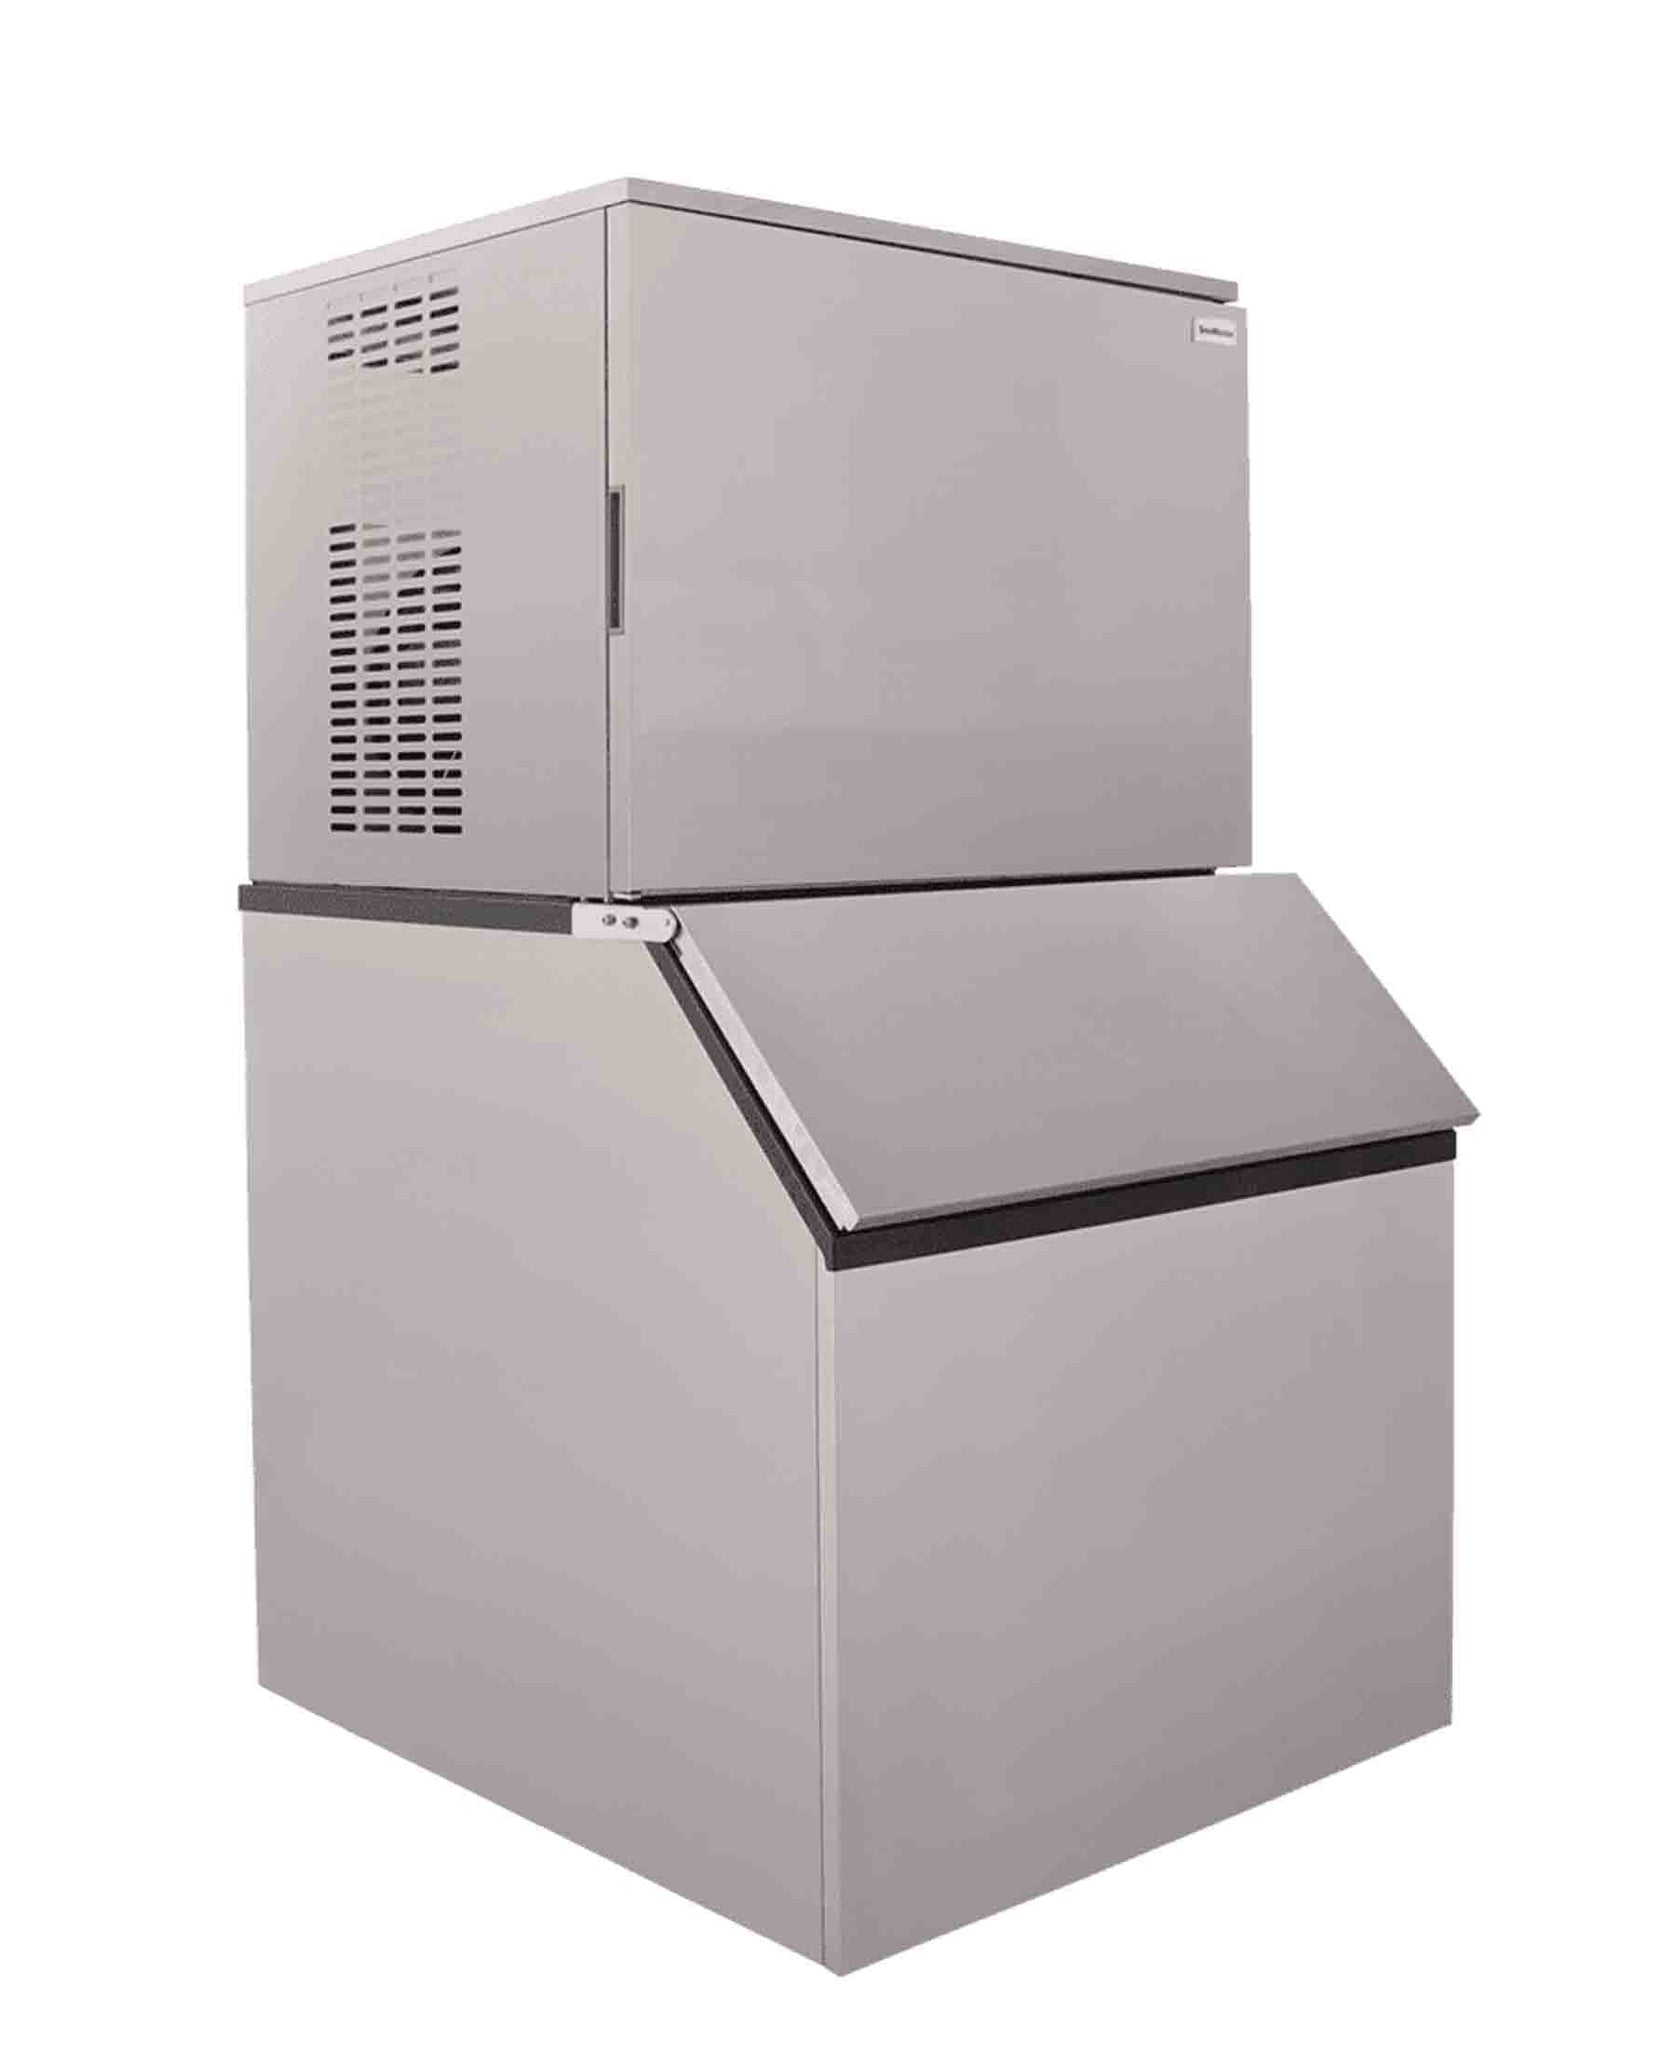 SnoMaster 250kg Plumbed-In Commercial Ice Maker - Silver